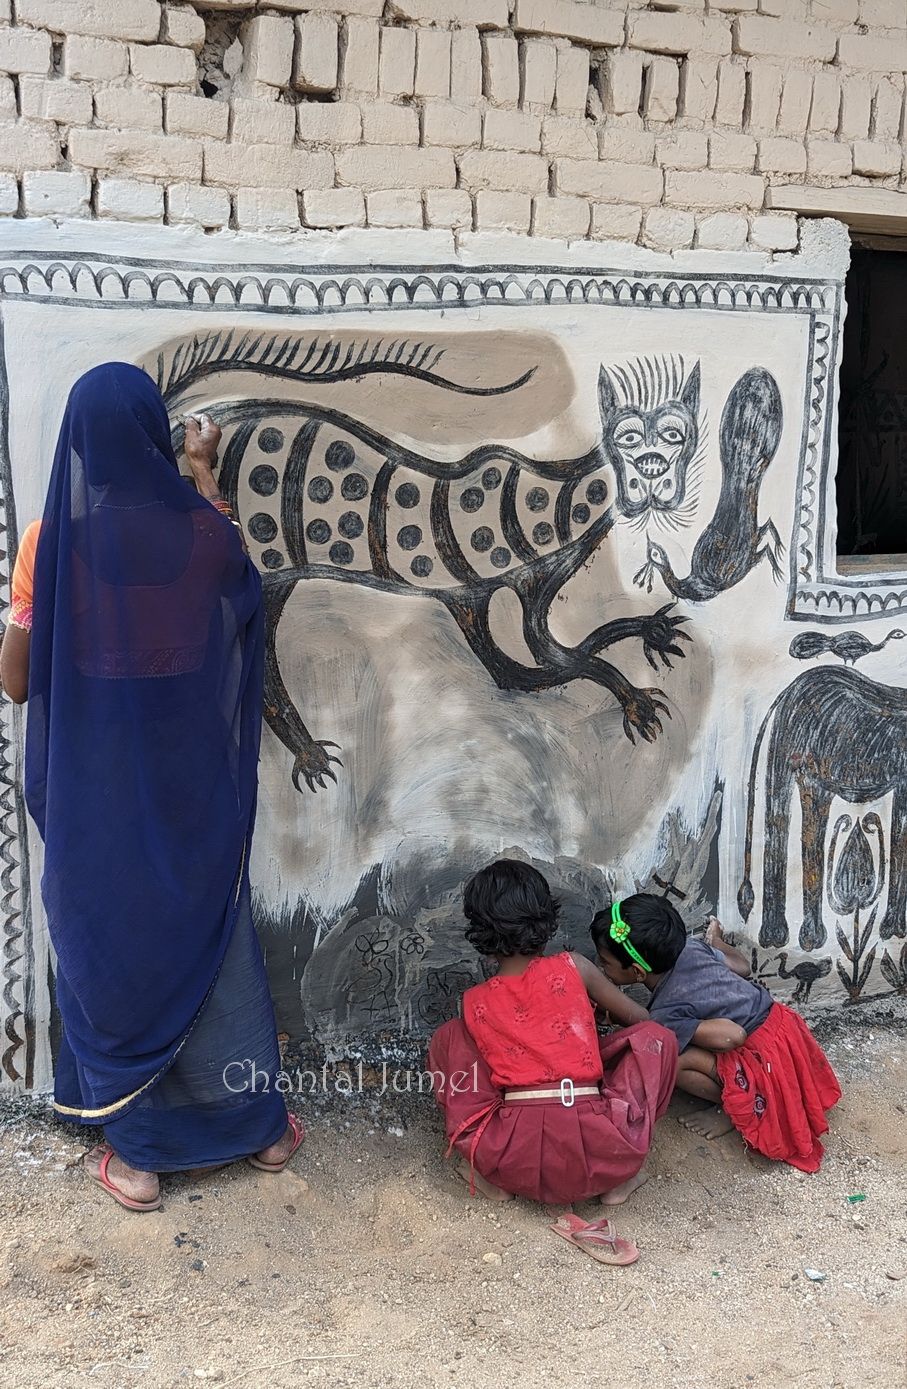 Jharkhand, Hazaribagh "Painting the walls for Sohrai" — part 3